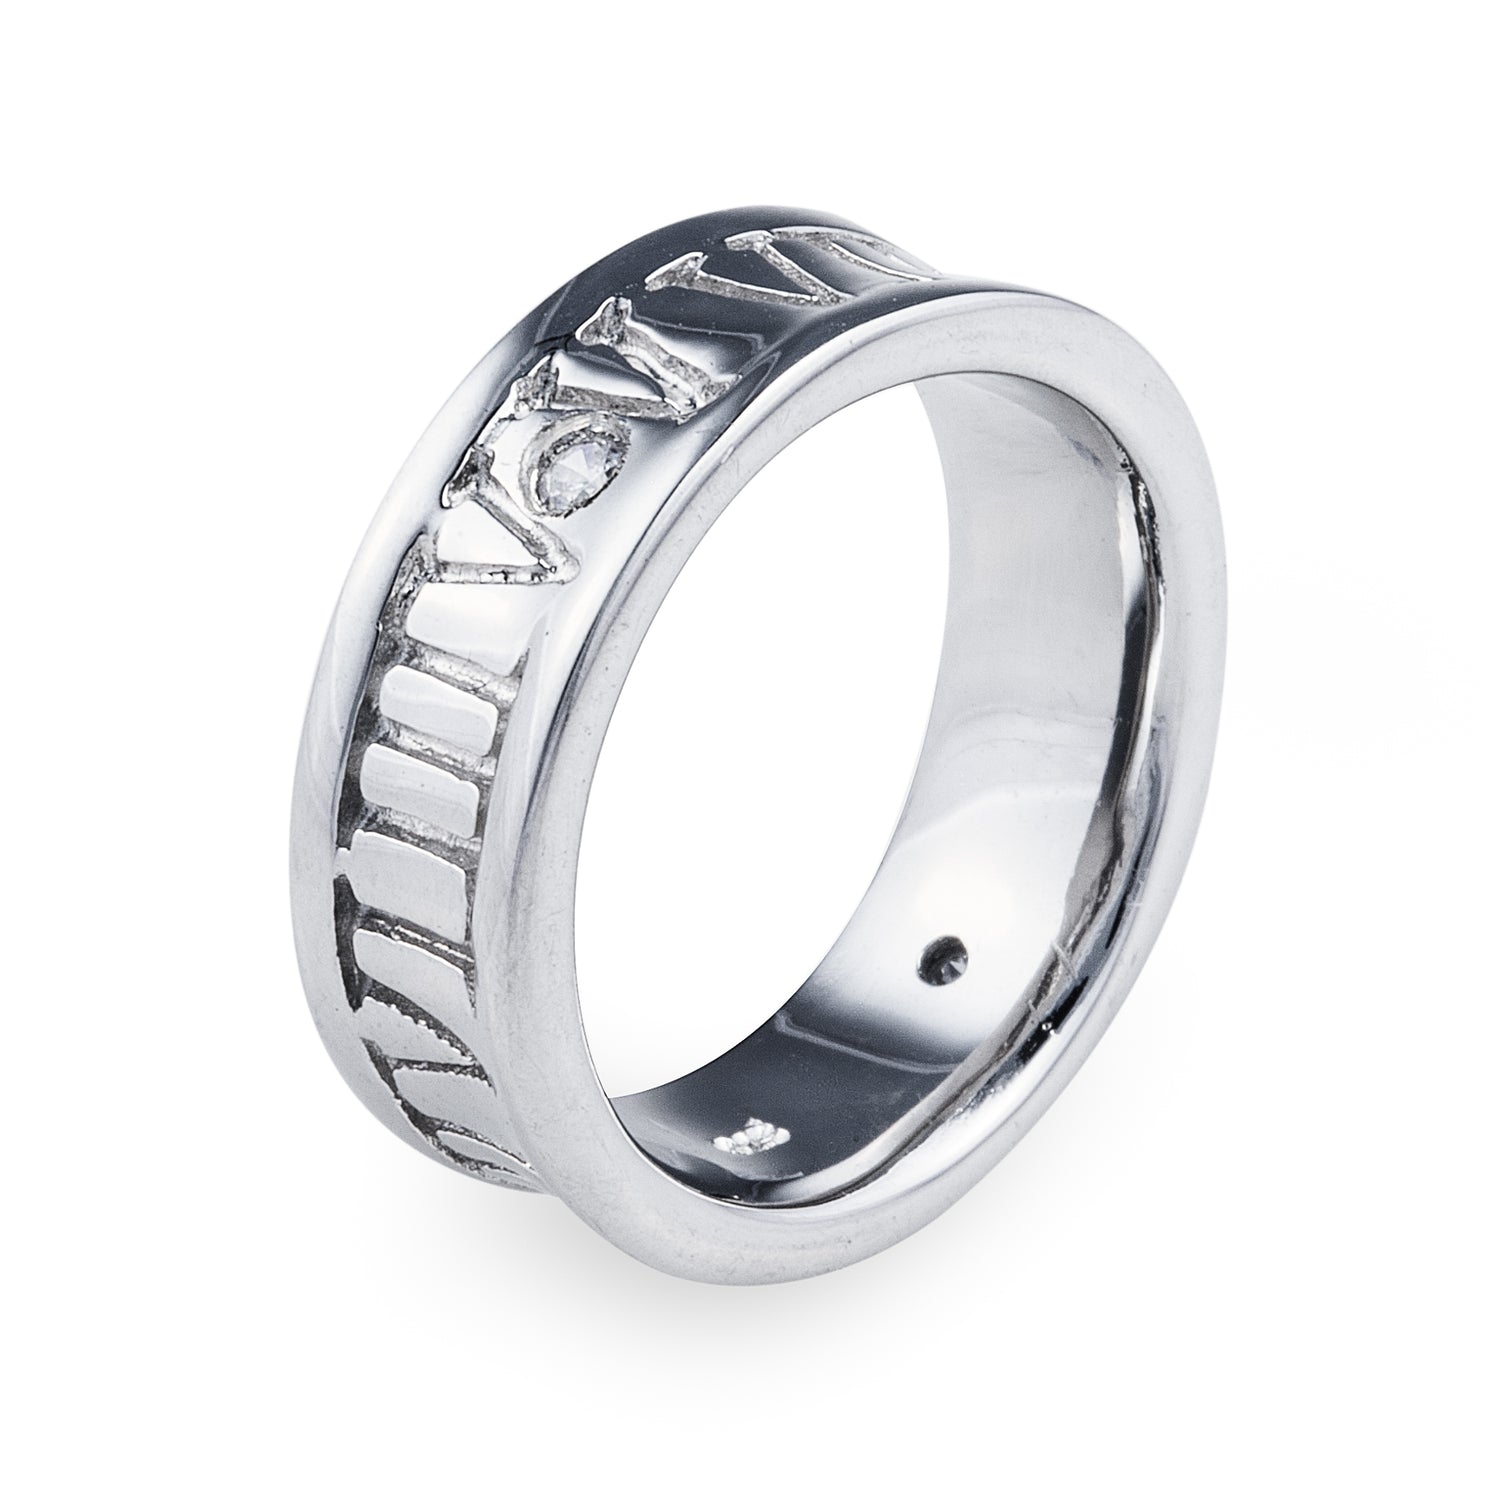 Ceasar Band Ring in 925 sterling silver with a single Cubic Zirconia stone surrounded by Roman numerals. This ring is perfect for comfortable everyday wear. Jewellery by Bellagio & Co. Worldwide Shipping.